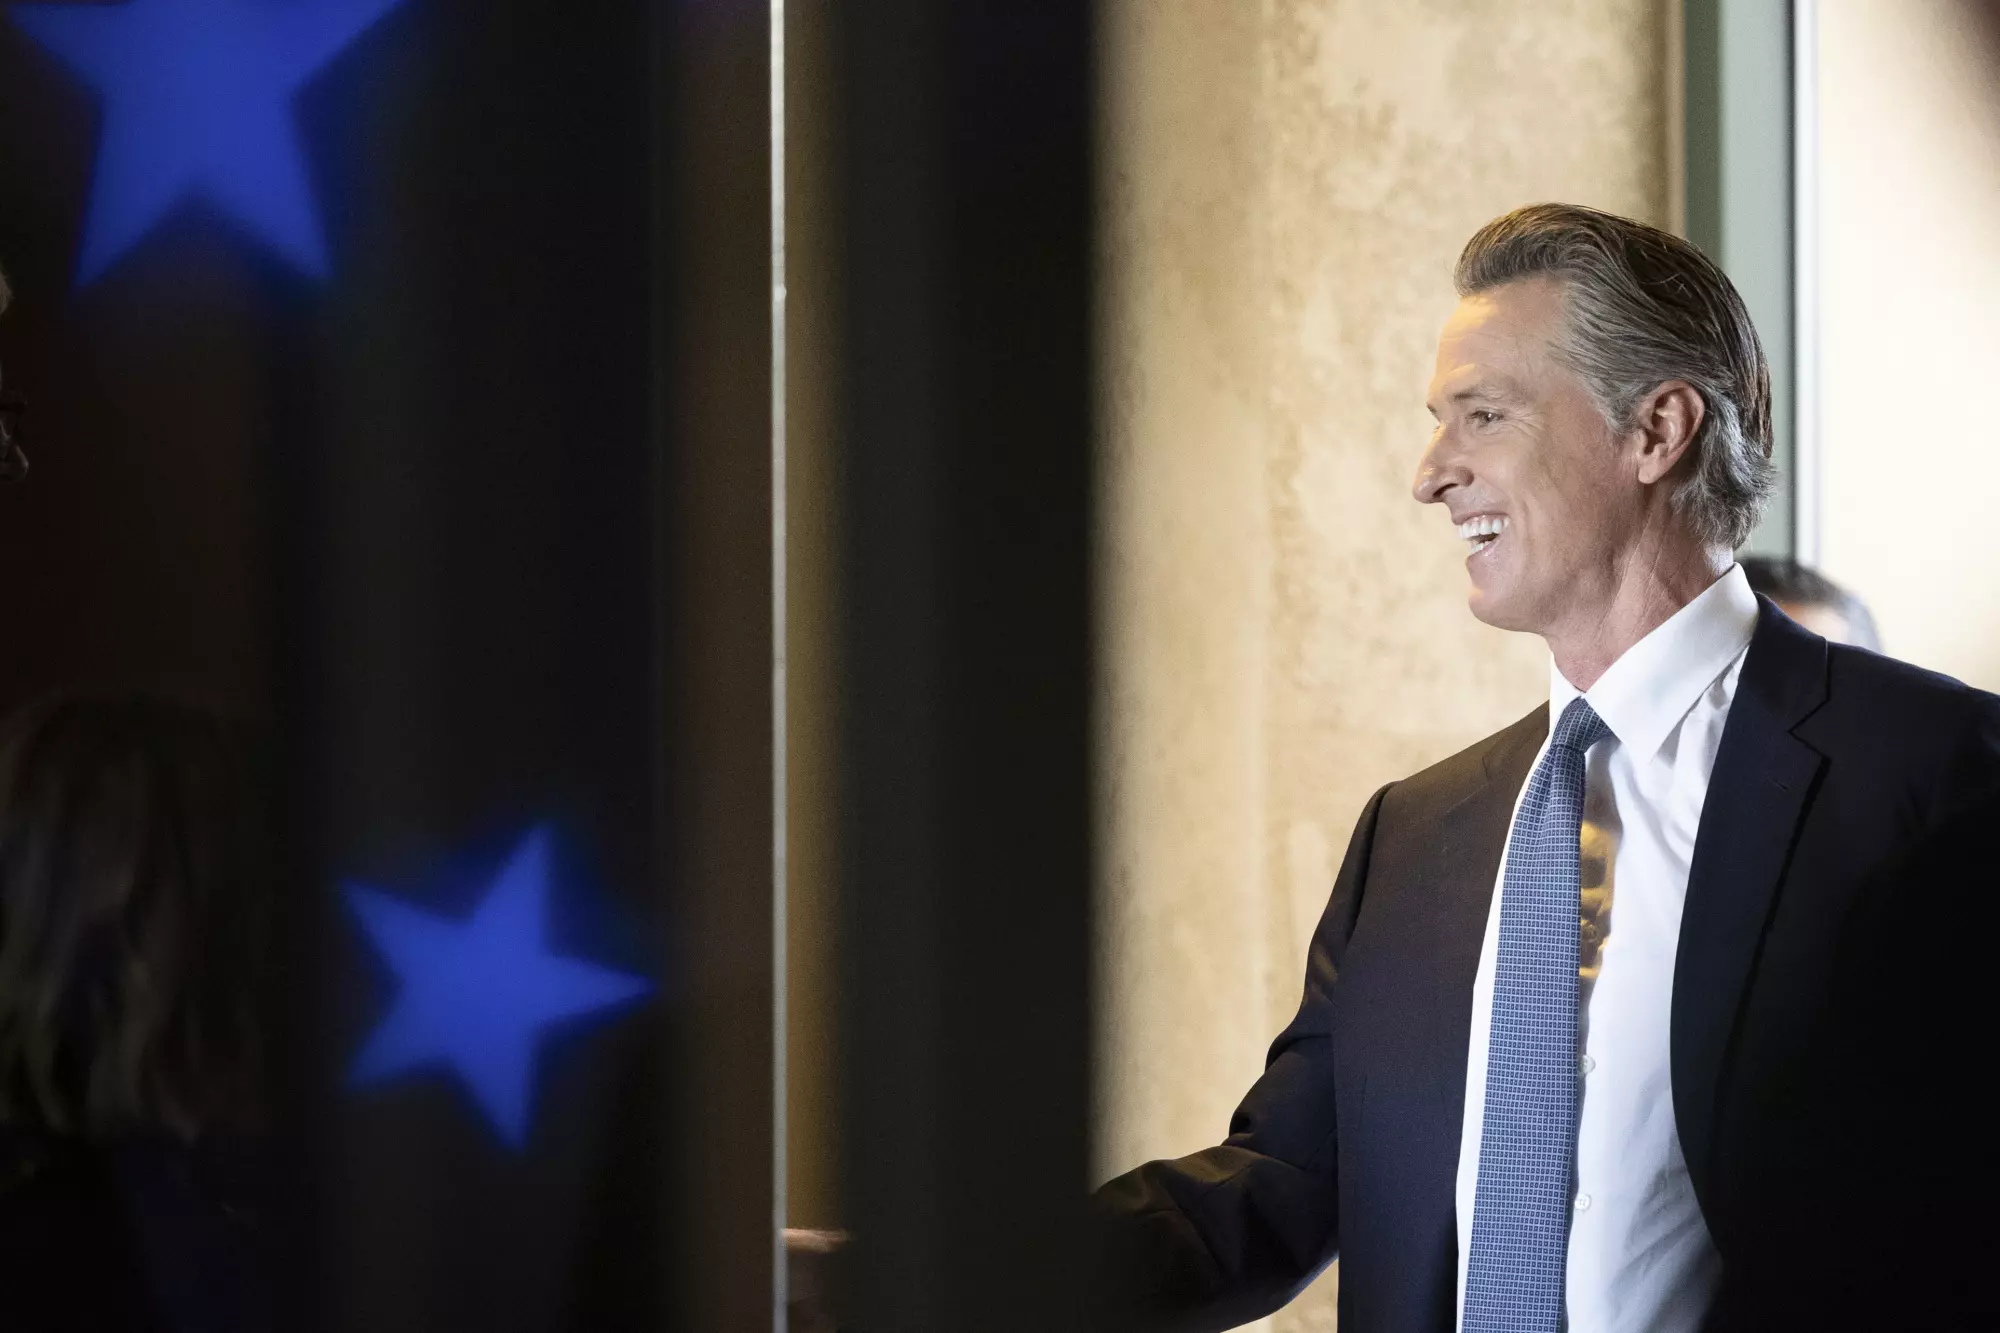 Despite diplomatic tension, Newsom is going to China to promote cooperation on climate change